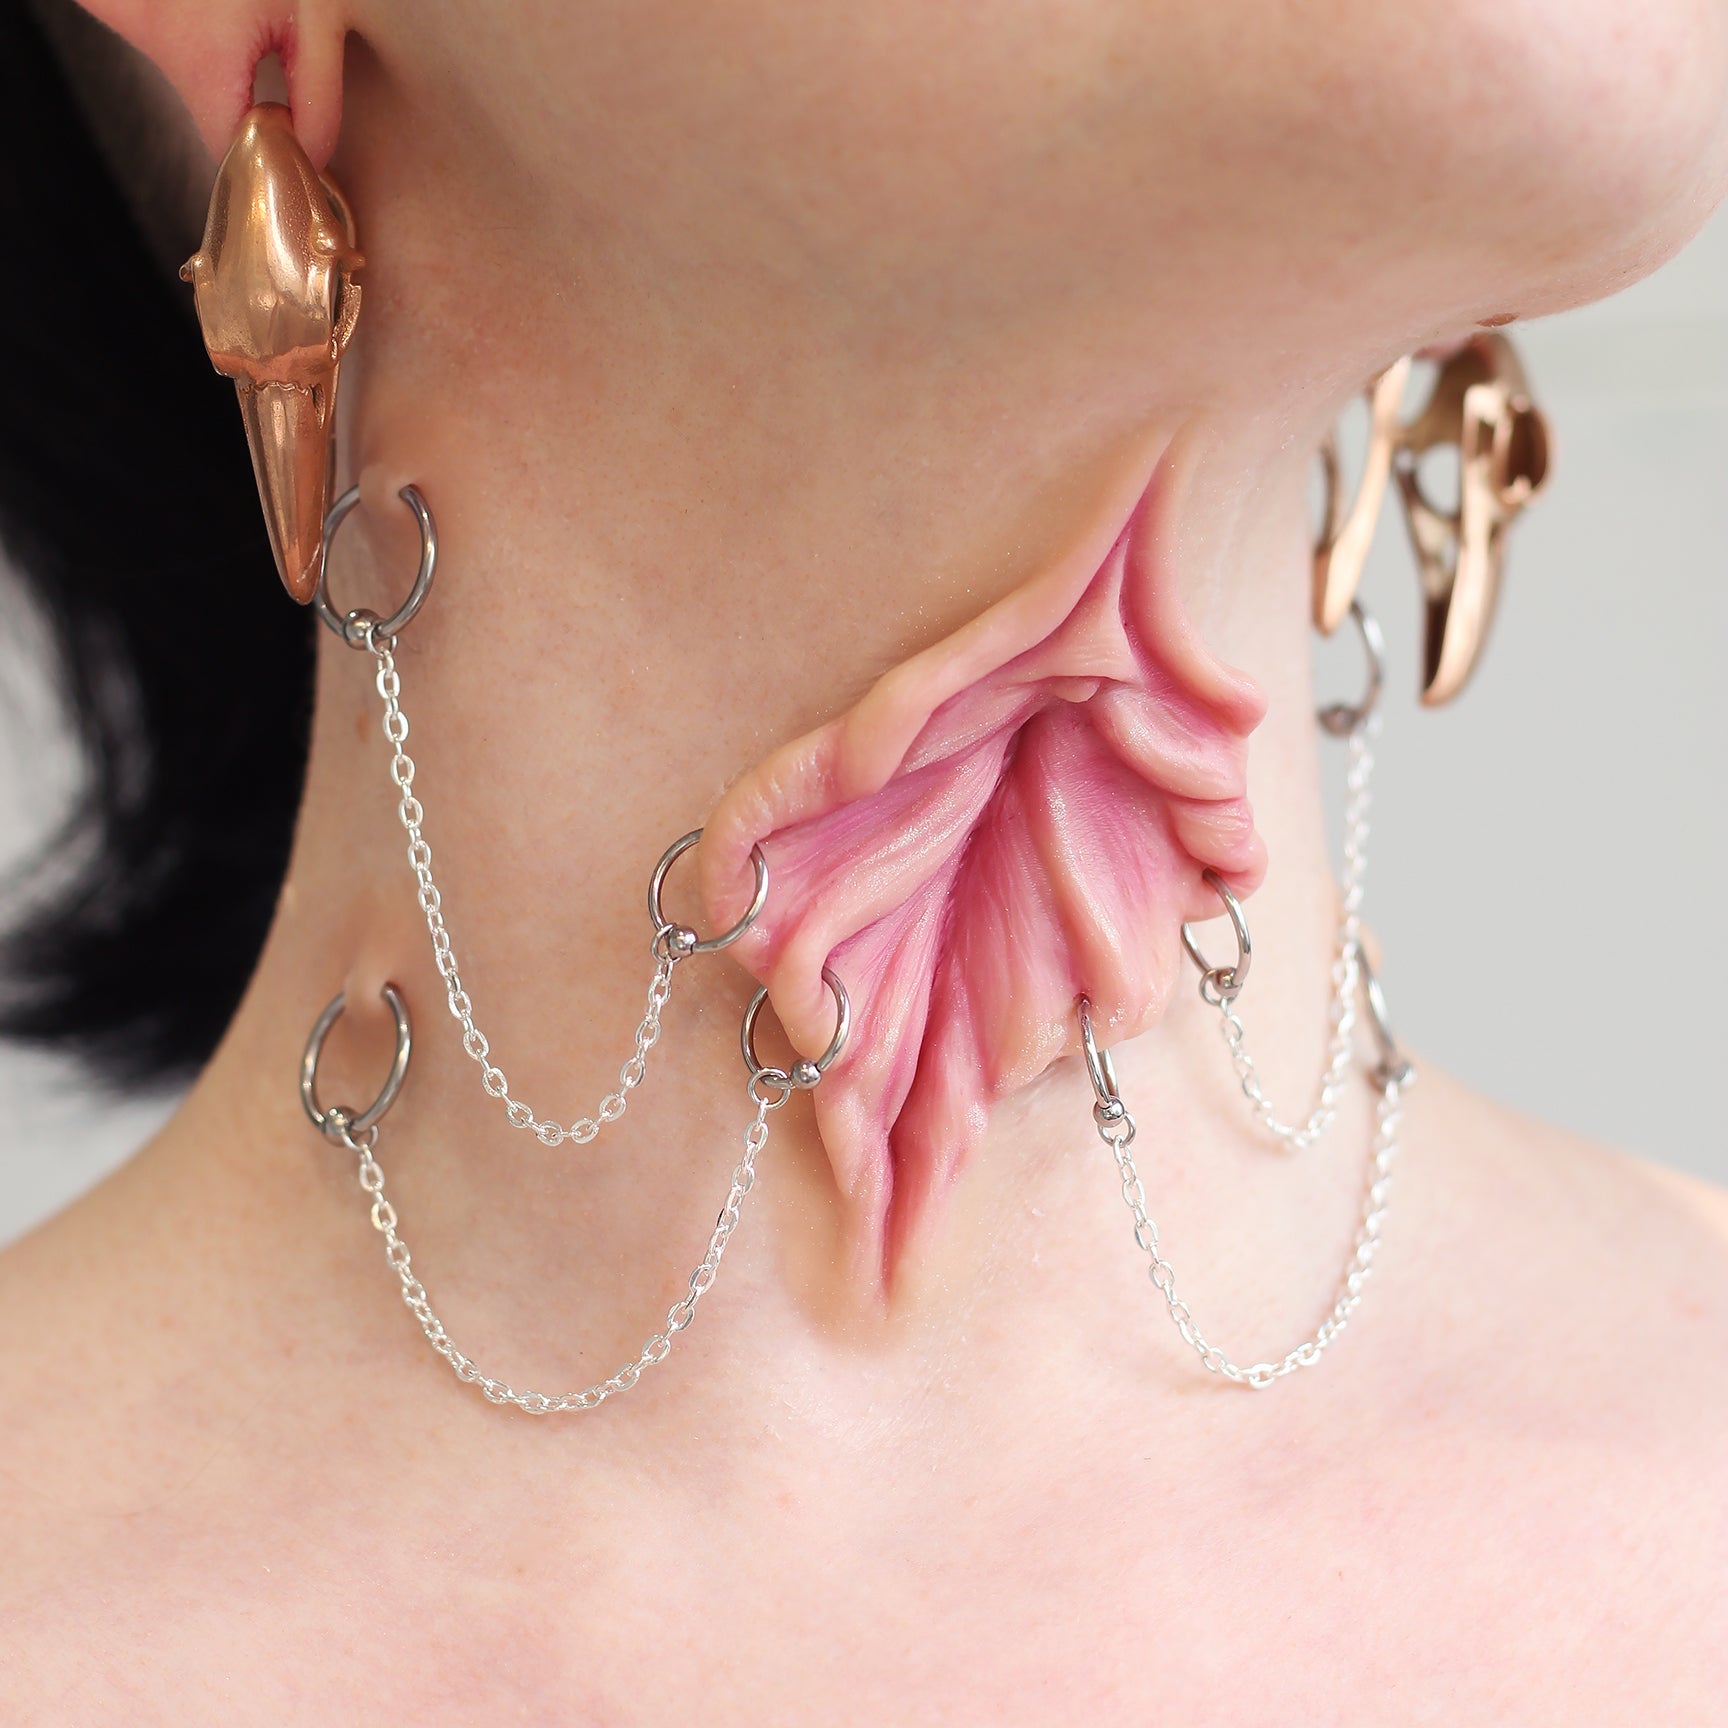 Woman's neck with a flower choker prosthetic